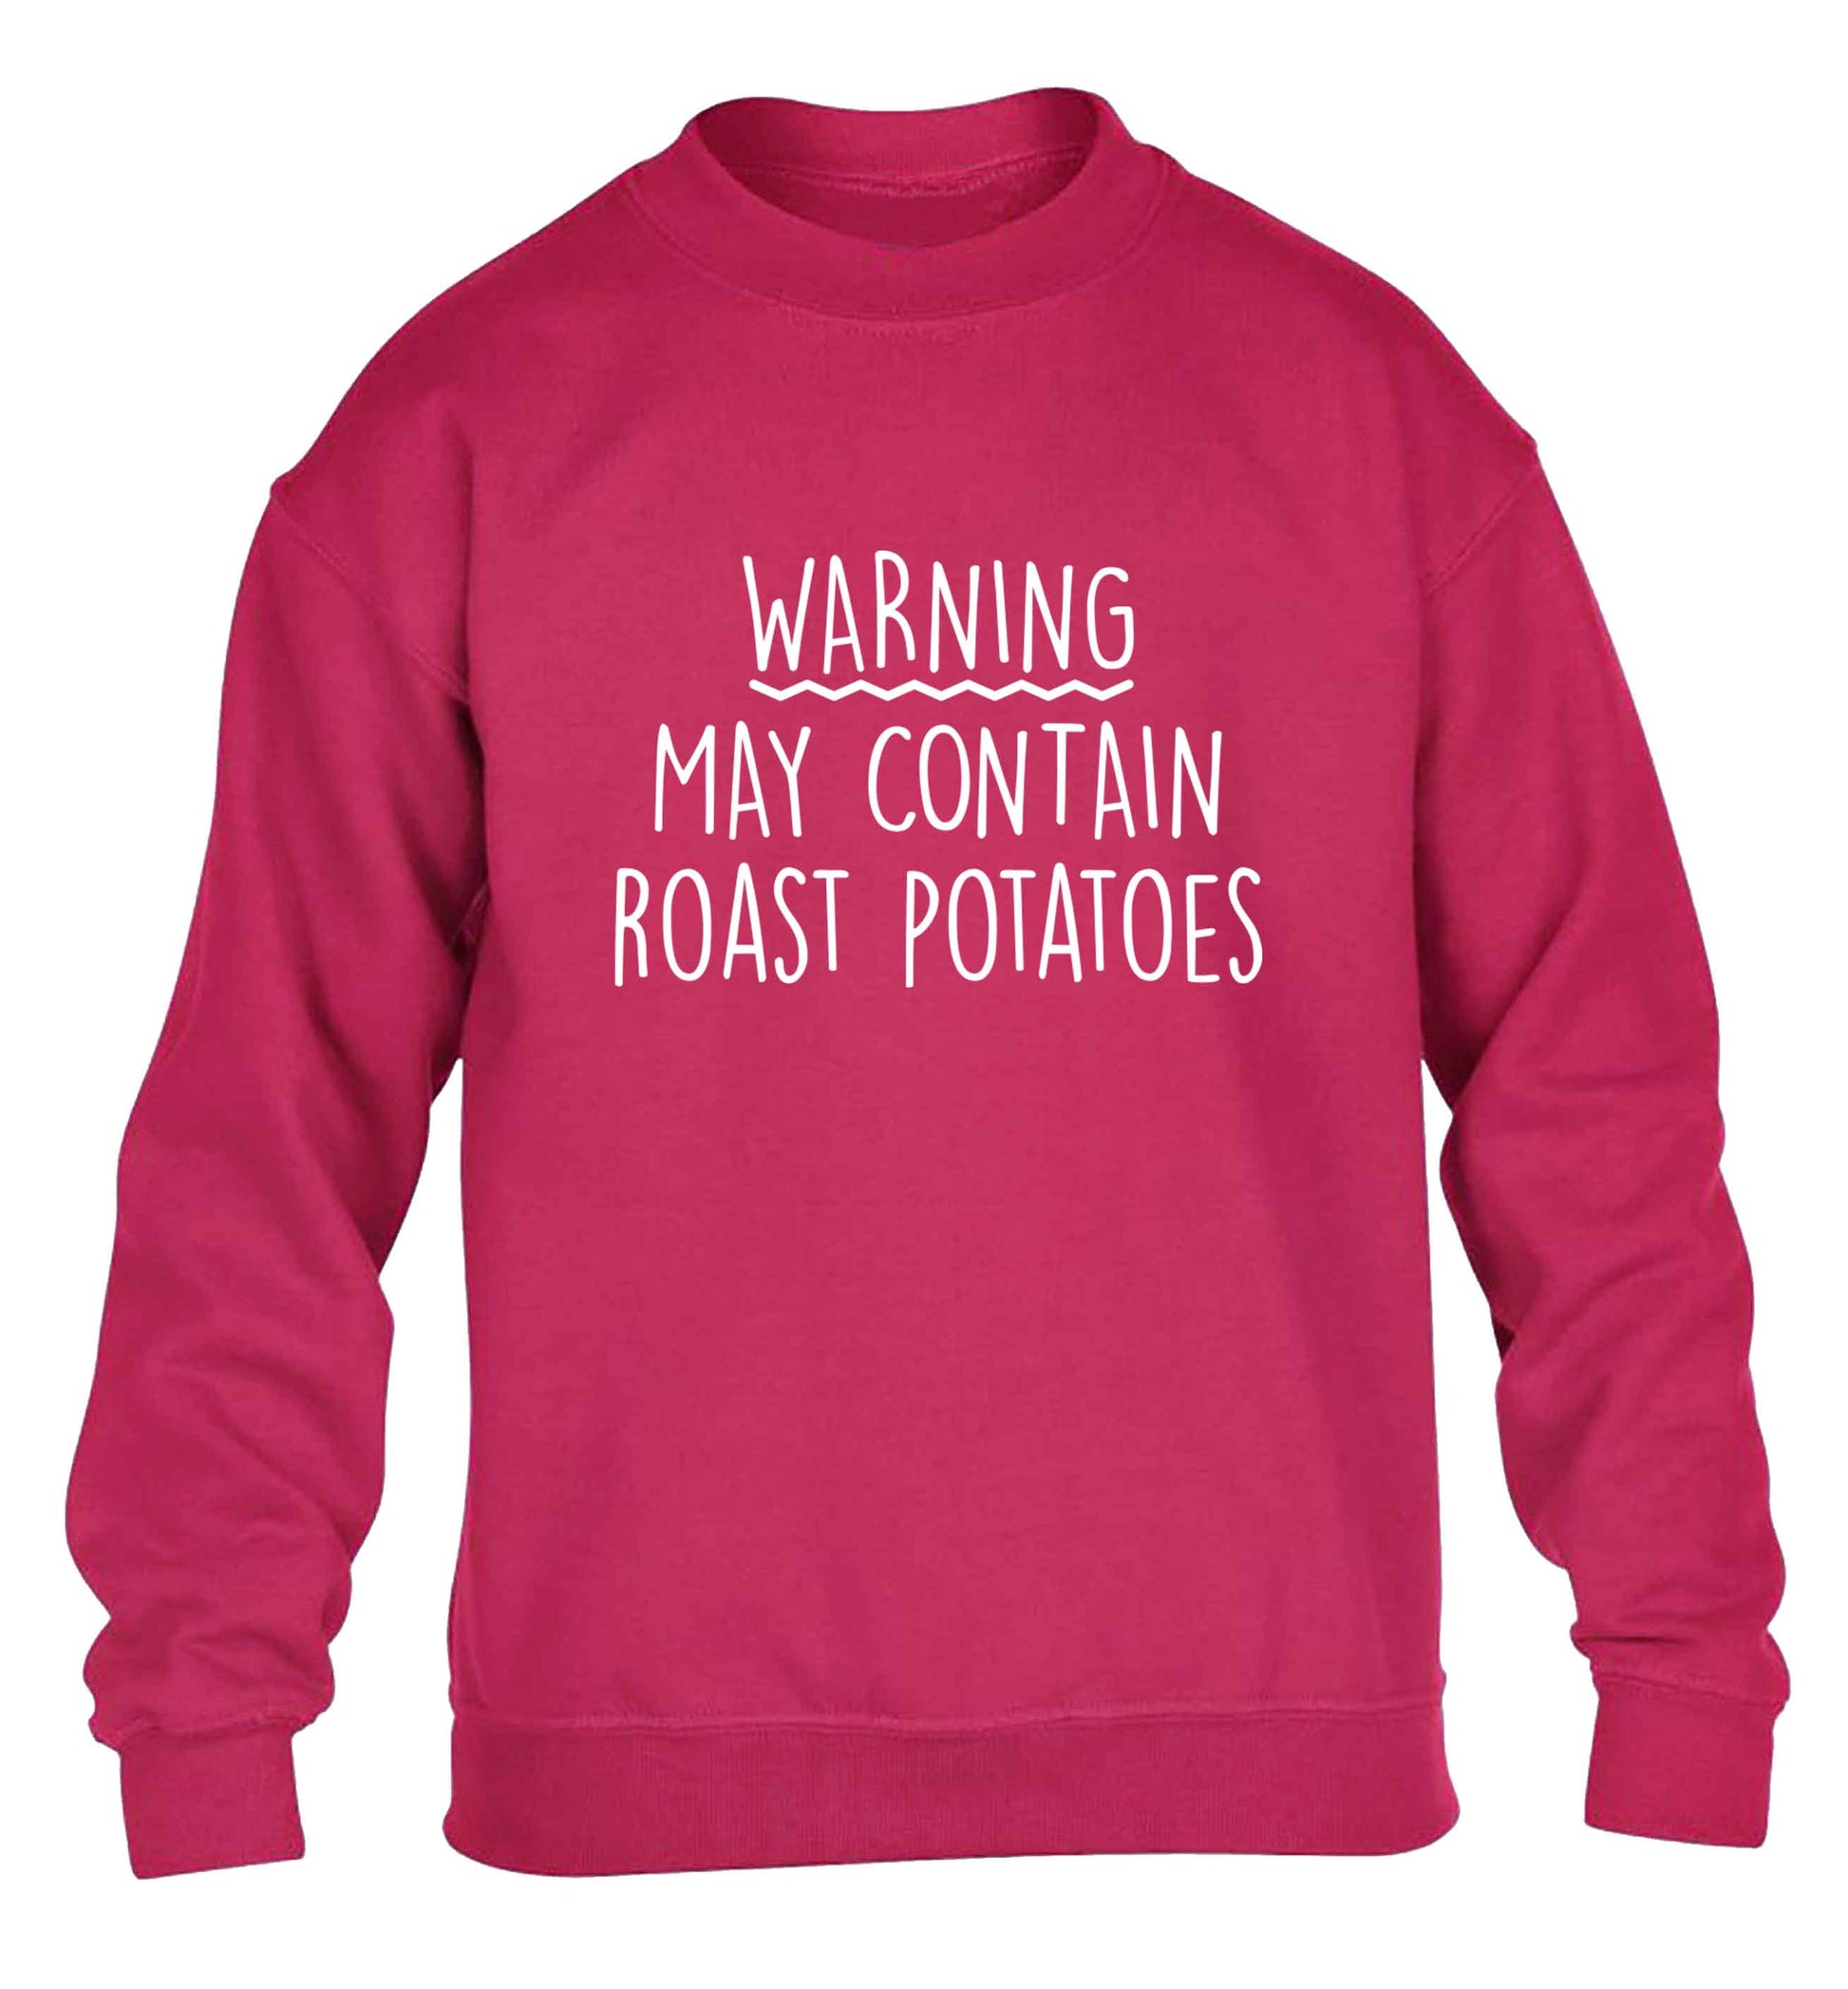 Warning may containg roast potatoes children's pink sweater 12-13 Years